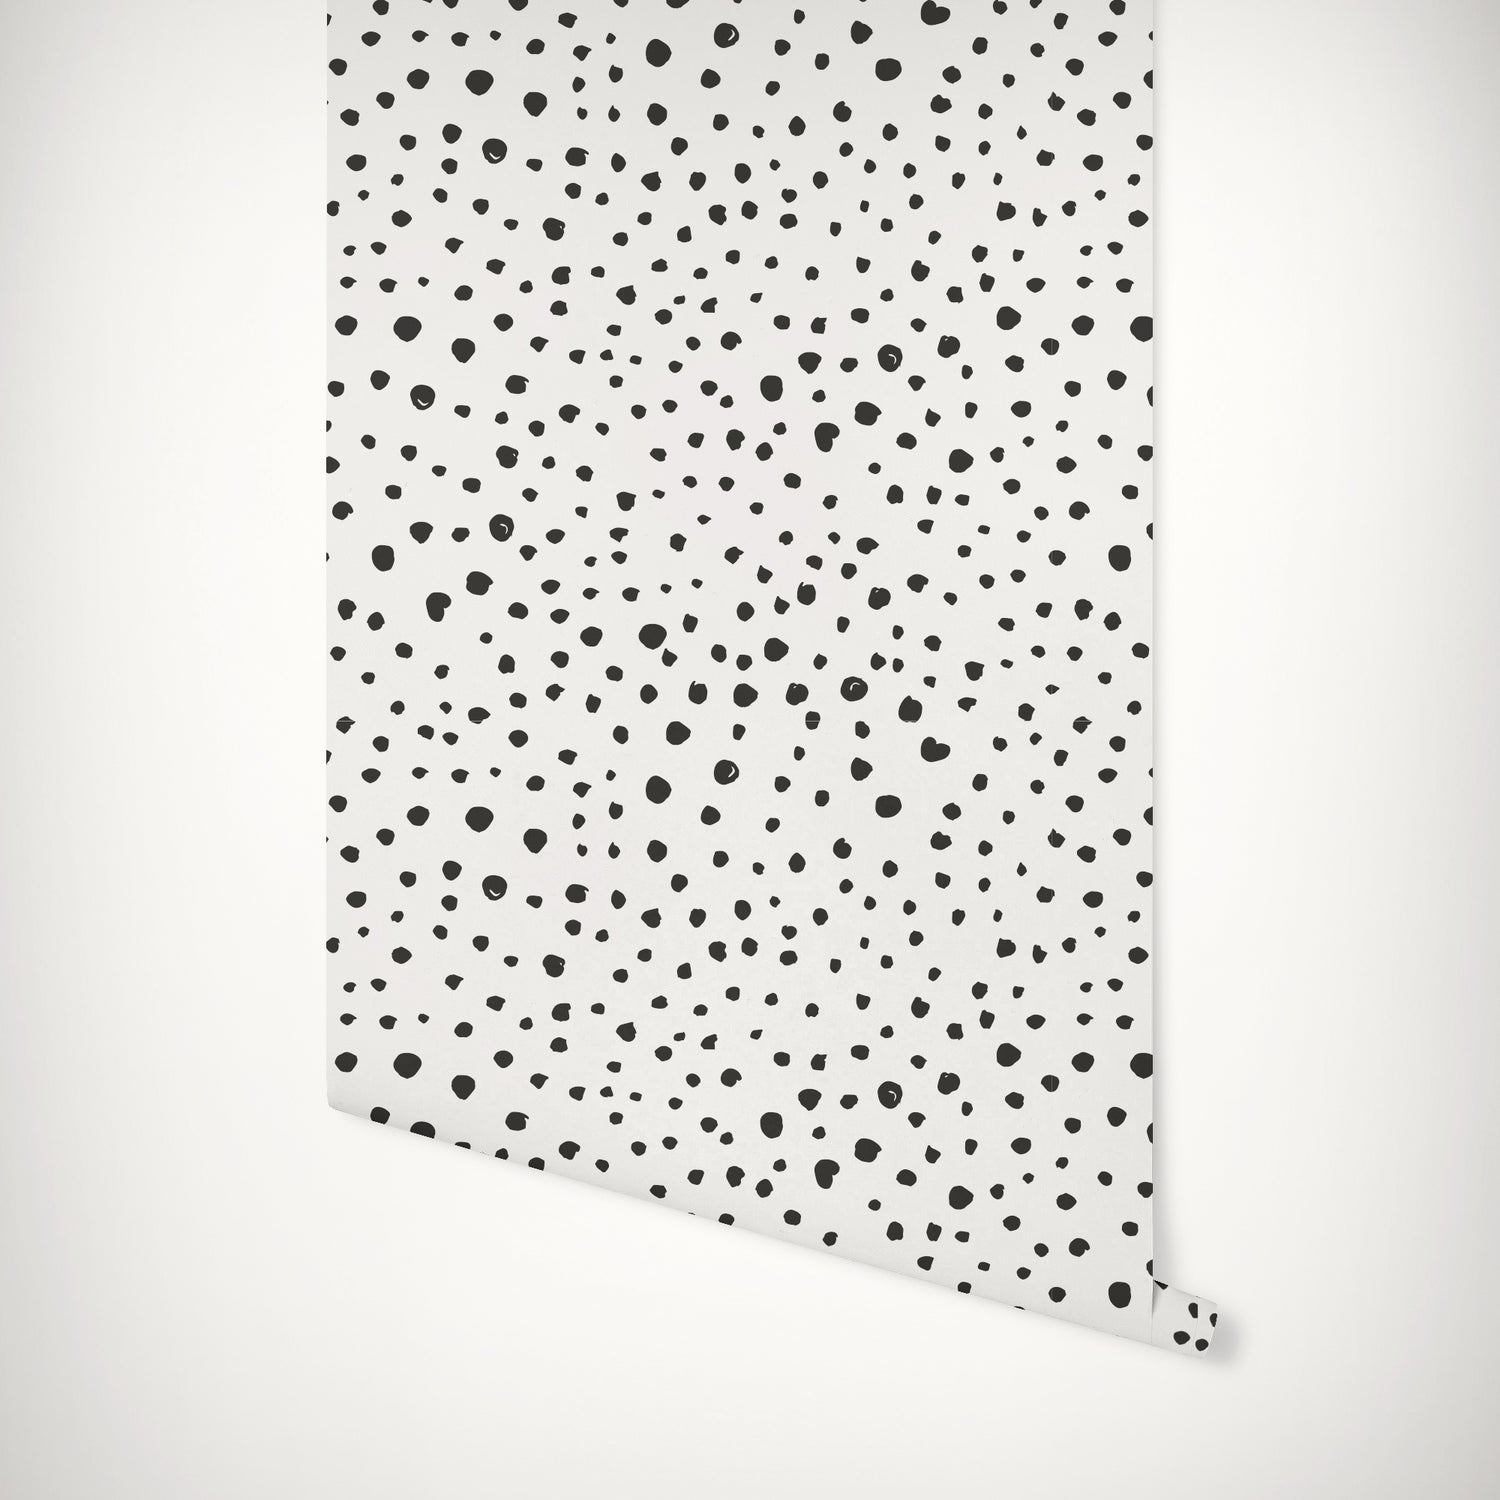 Black Dalmatian Dots Self-Adhesive Wallpaper. A white background wallpaper with black dots that can be used in any room